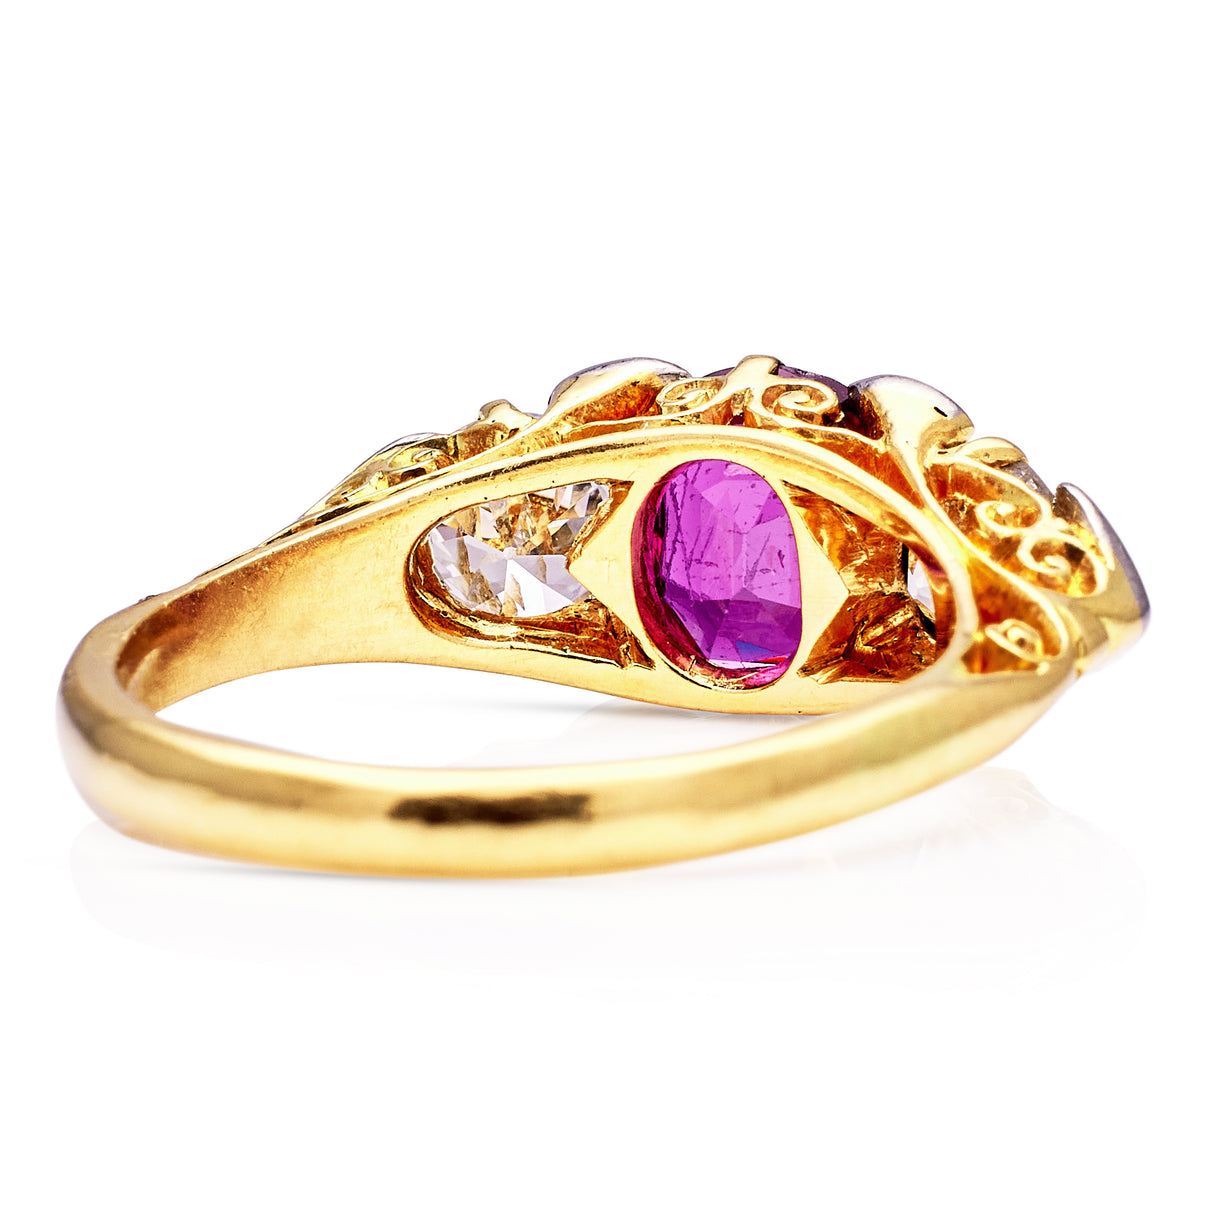 Antique, Edwardian Three Stone Natural Ruby and Diamond Engagement Ring, 18ct Yellow Gold rear view